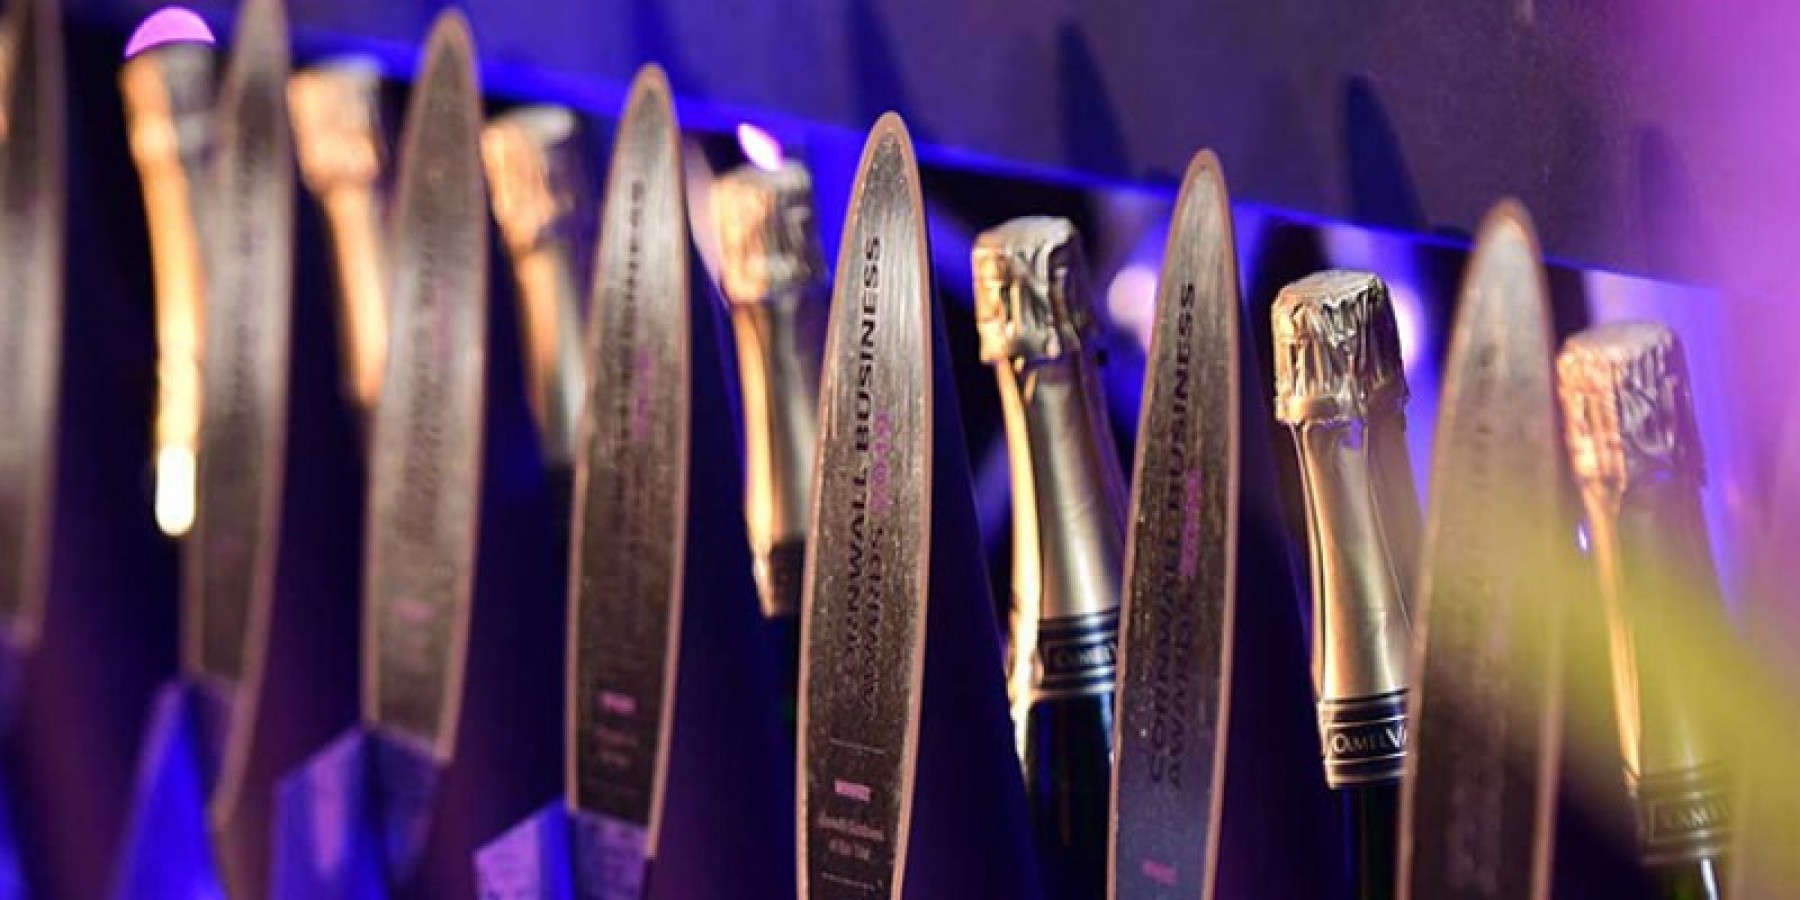 Cornwall Business Awards trophies